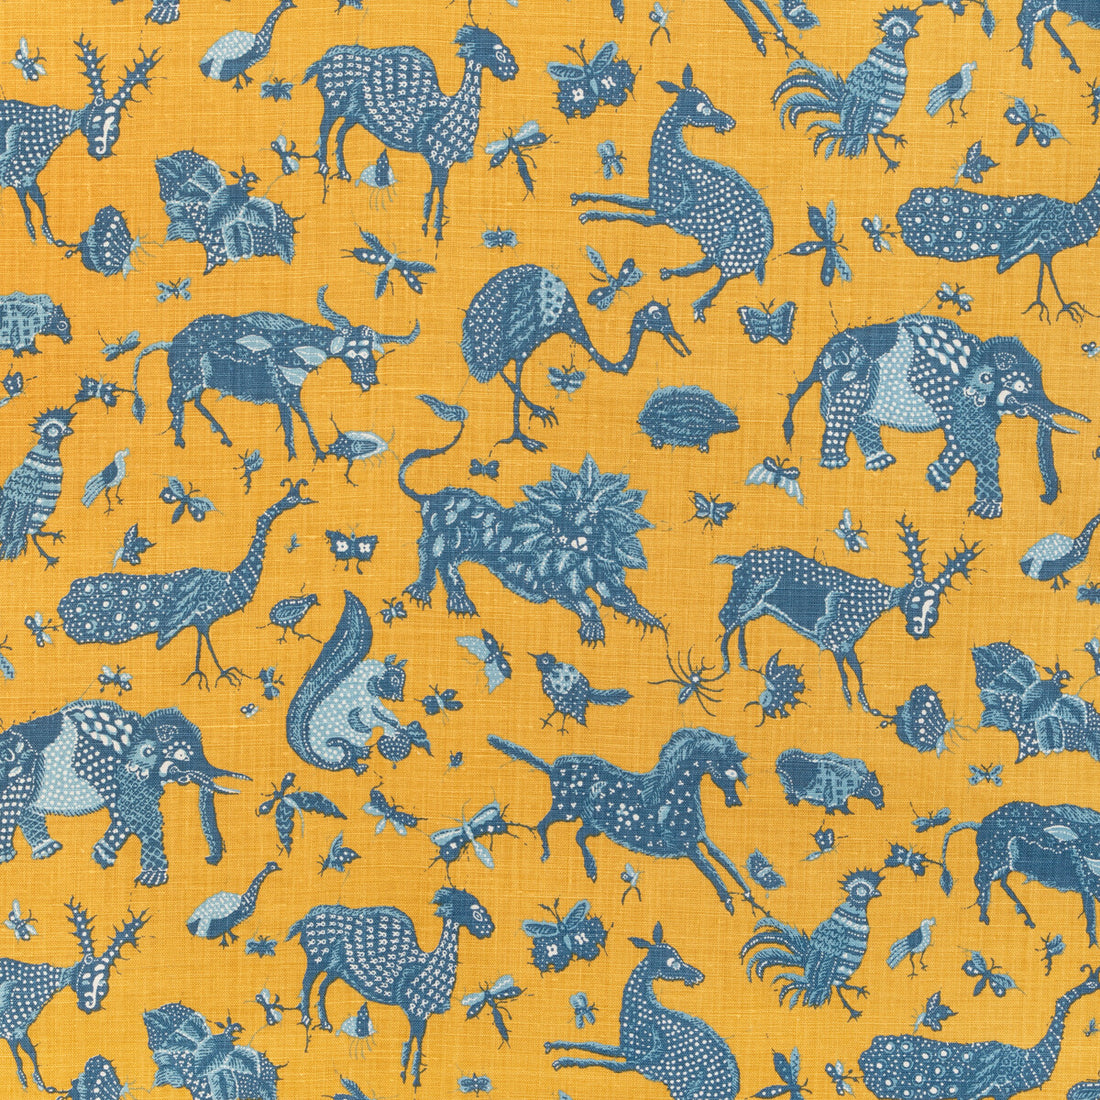 Java Jungle Linen fabric in maize color - pattern 2023127.450.0 - by Lee Jofa in the Lee Jofa 200 collection